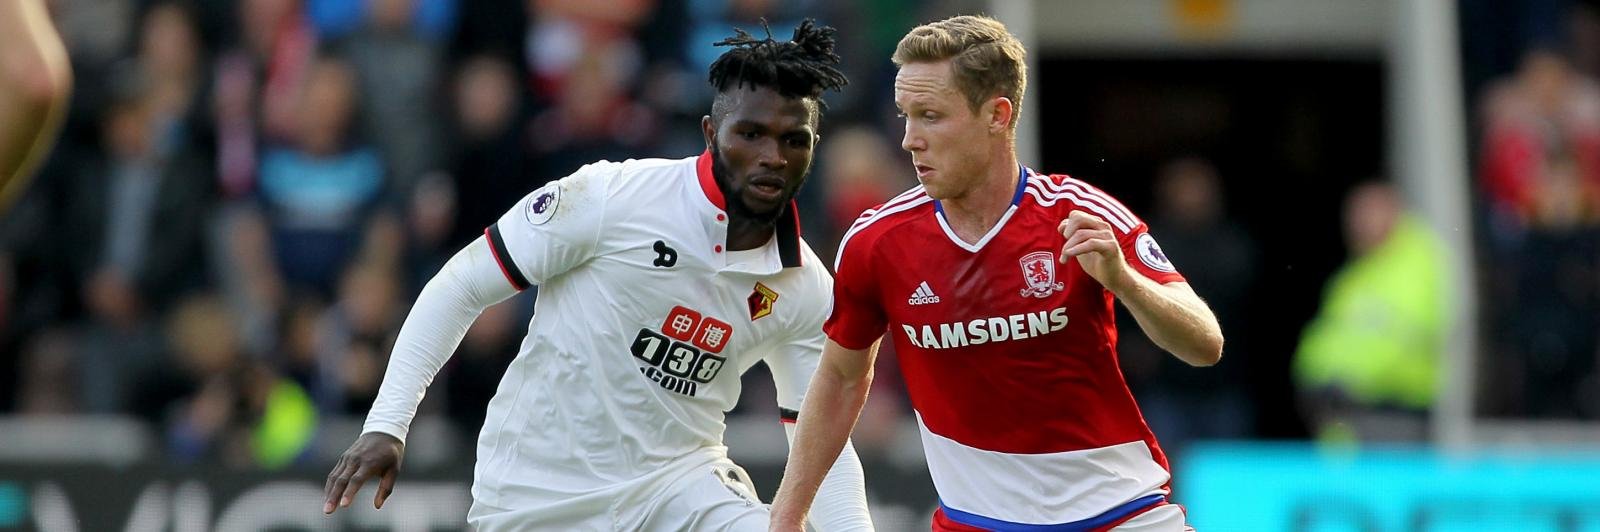 Middlesbrough midfielder in line for shock England call-up